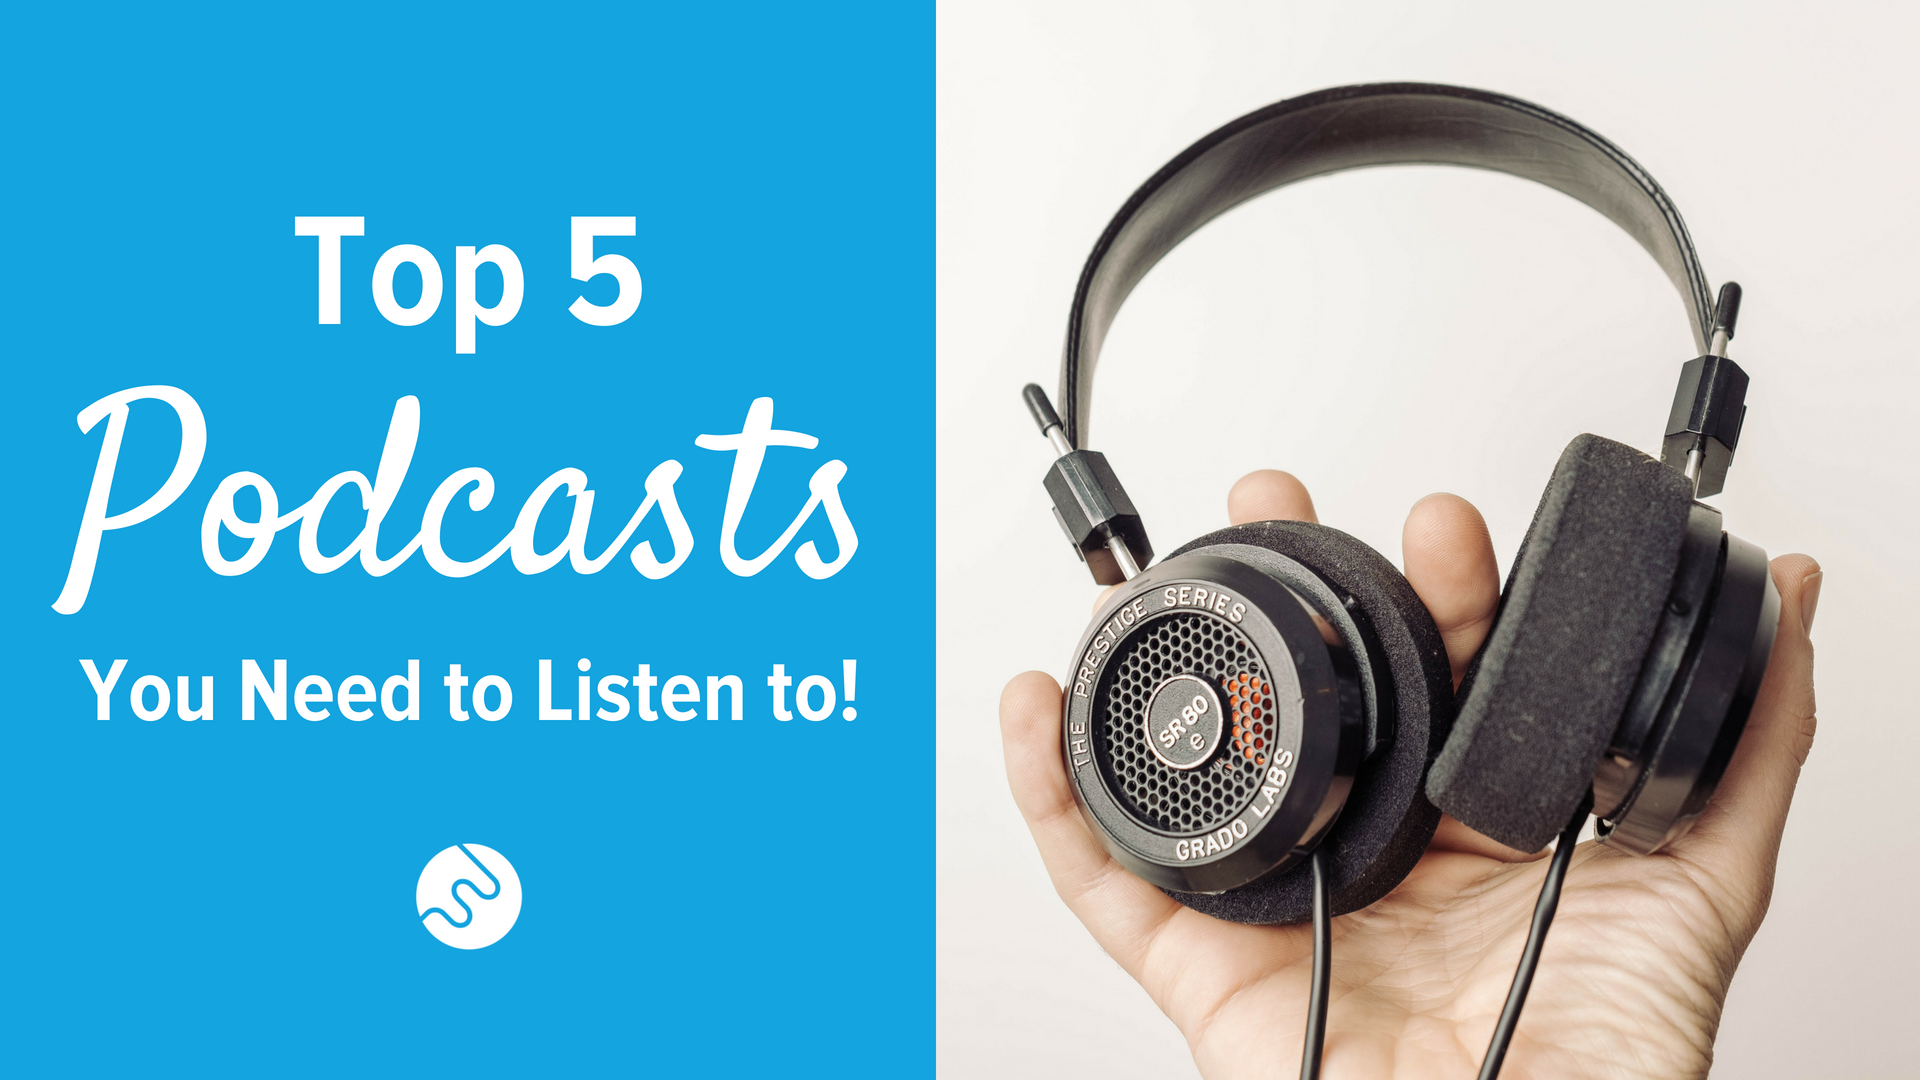 Top 5 Podcasts You Need to Listen to!